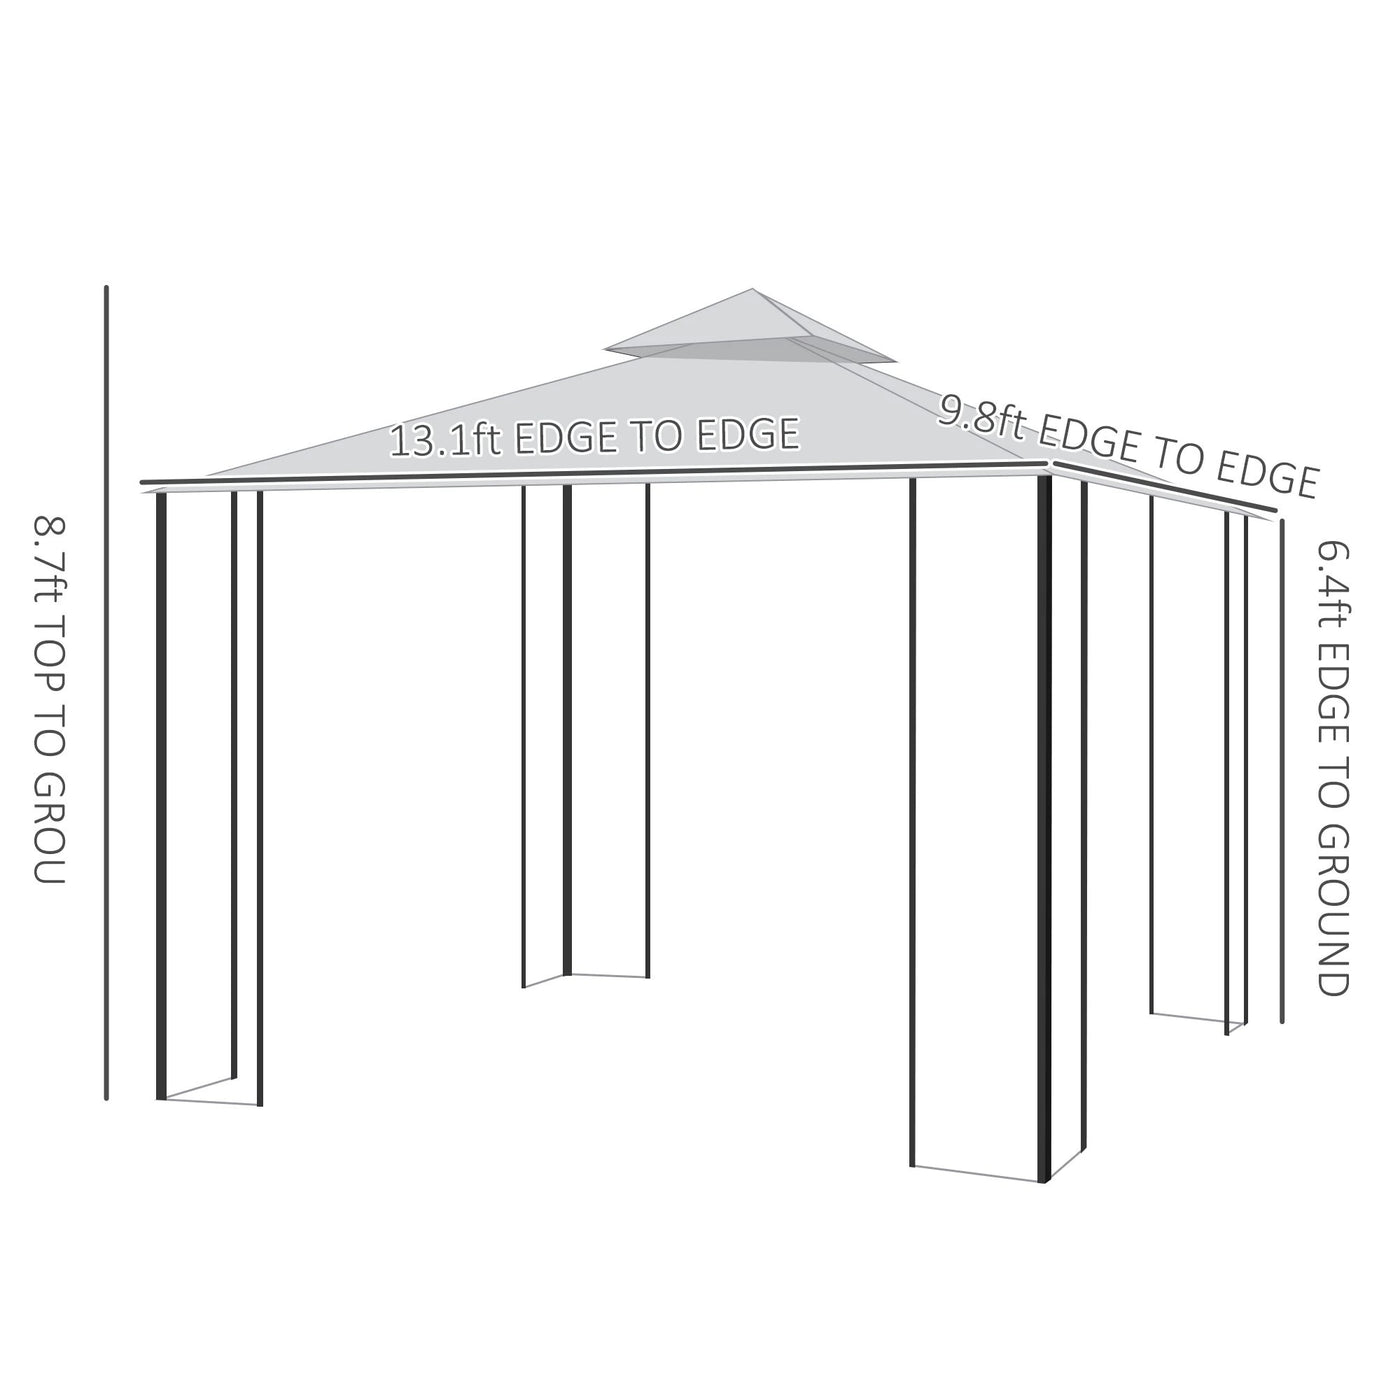 Outsunny 10' x 13' Outdoor Soft Top Gazebo Pergola with Curtains, Sage Grey - $255